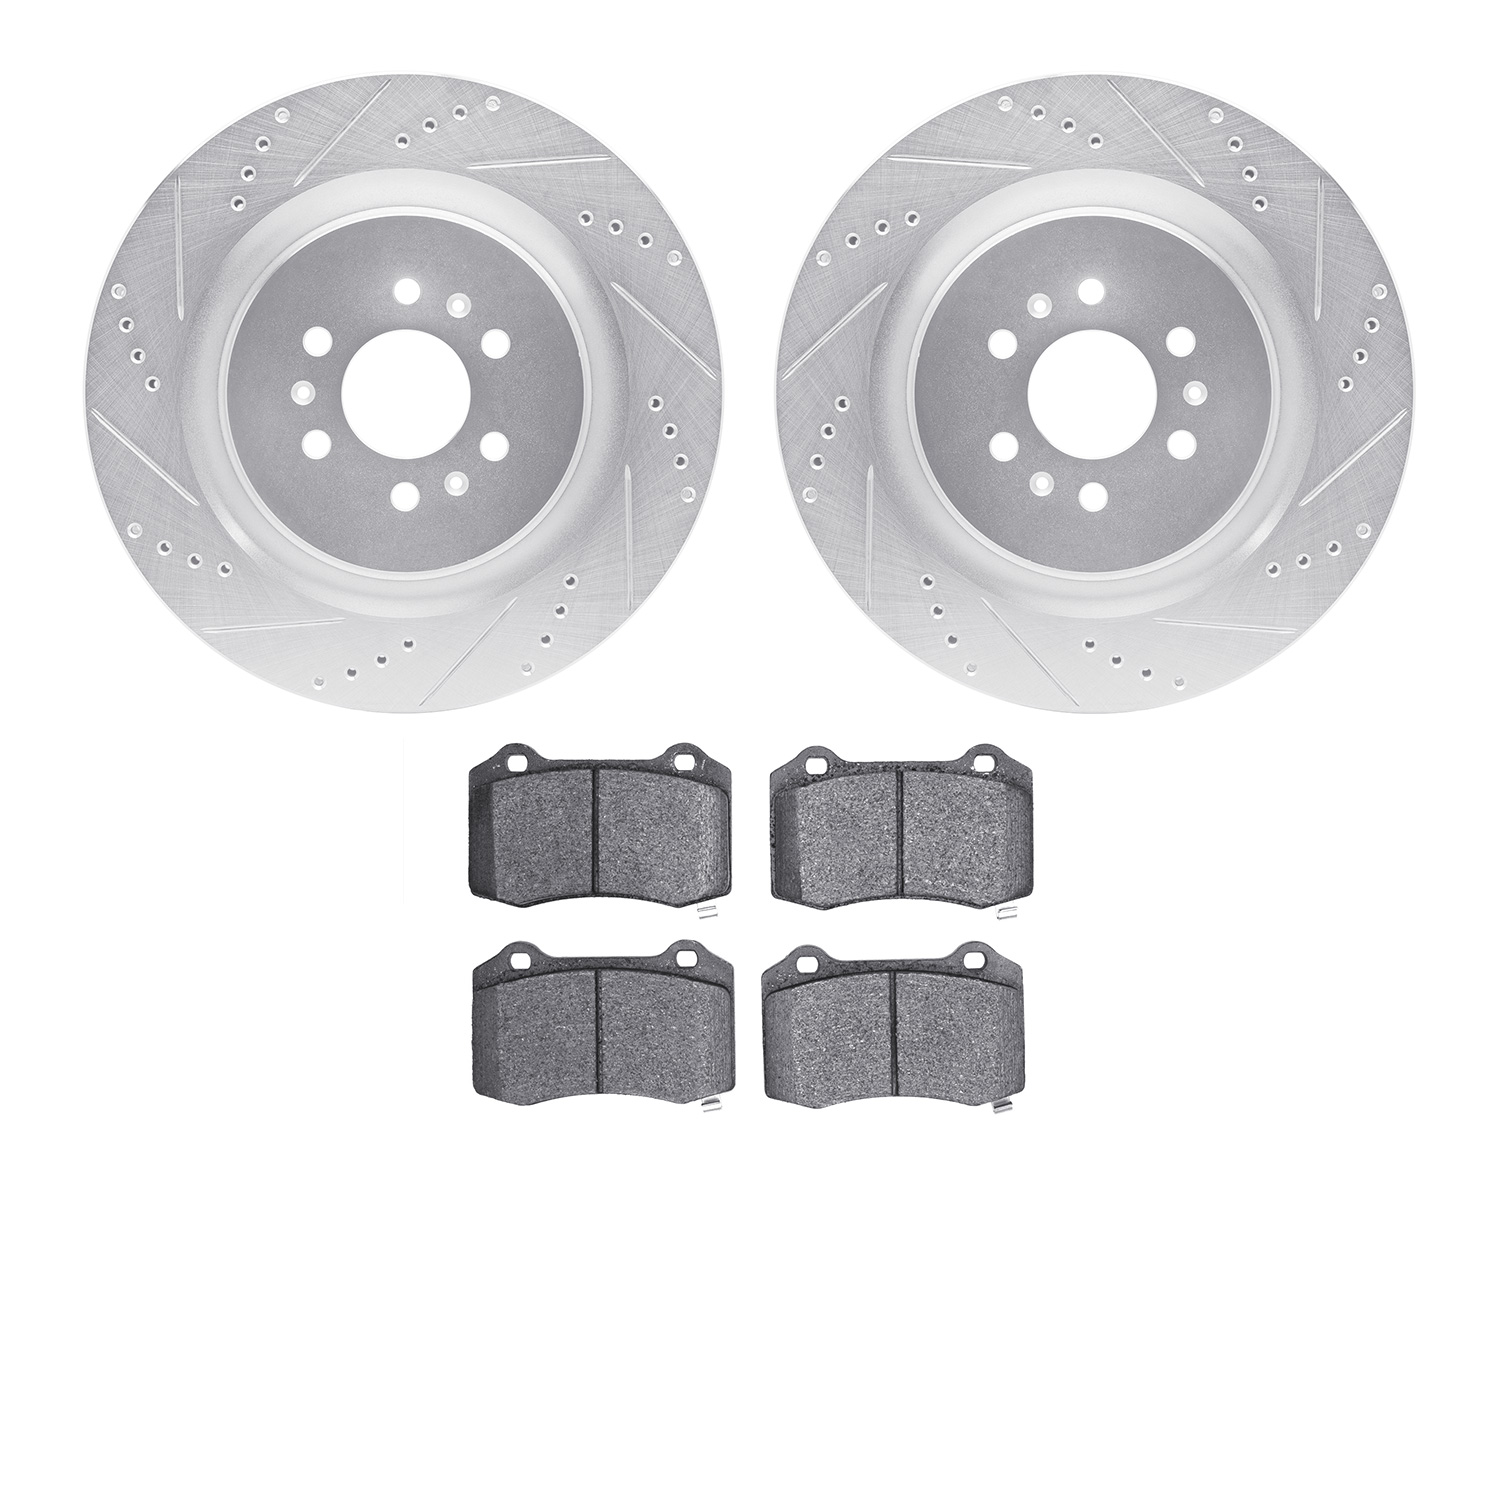 7402-46006 Drilled/Slotted Brake Rotors with Ultimate-Duty Brake Pads Kit [Silver], 2004-2011 GM, Position: Rear